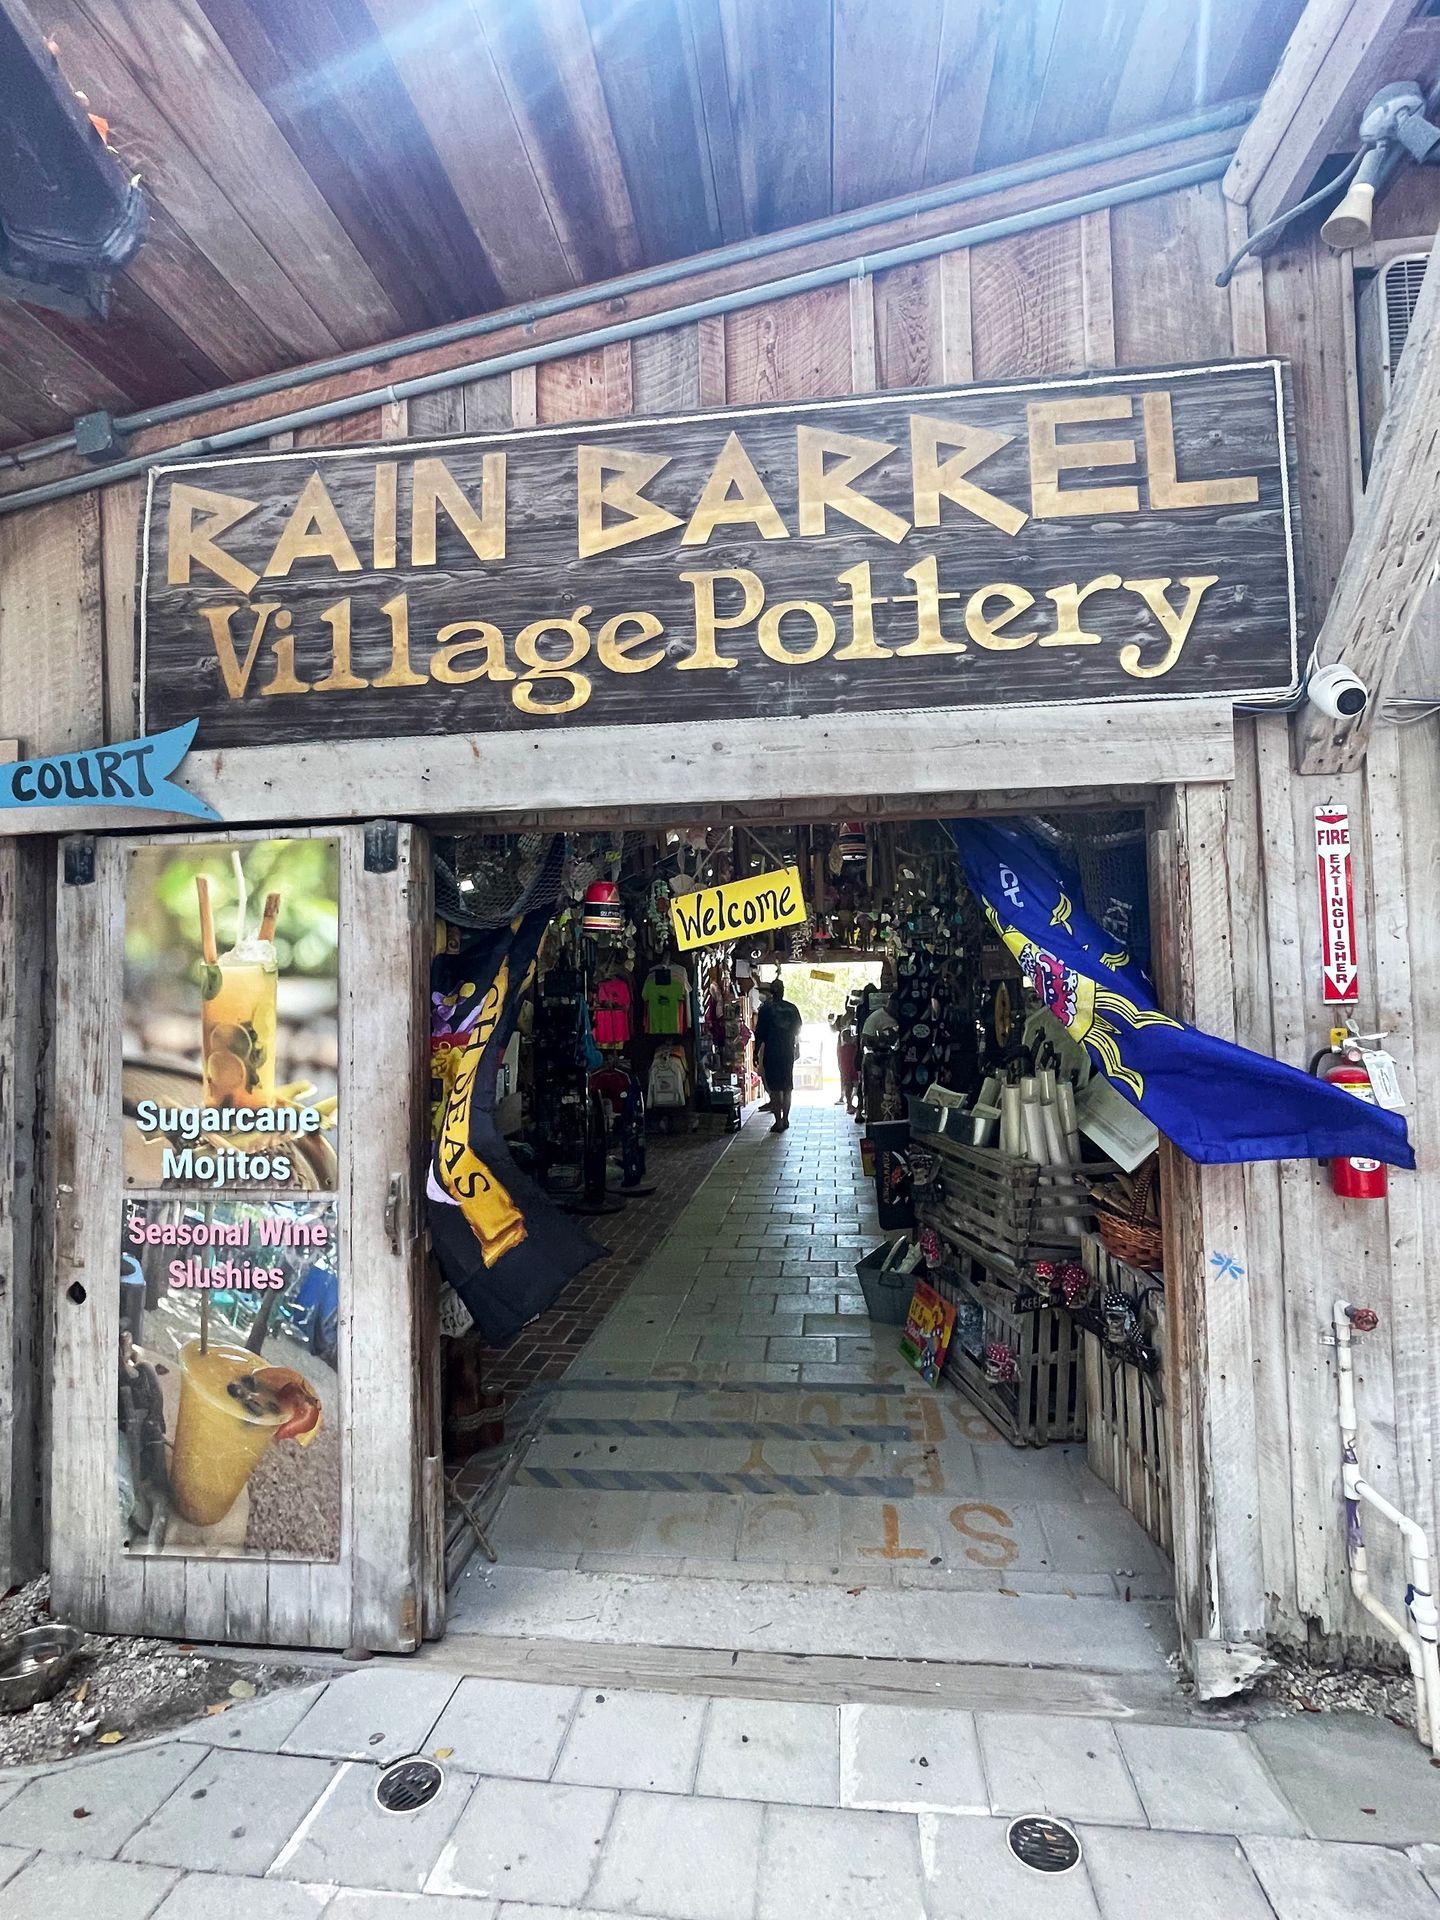 A doorway with a "Rain Barrel Artisan Village" sign above it. The door leads into a giftshop.